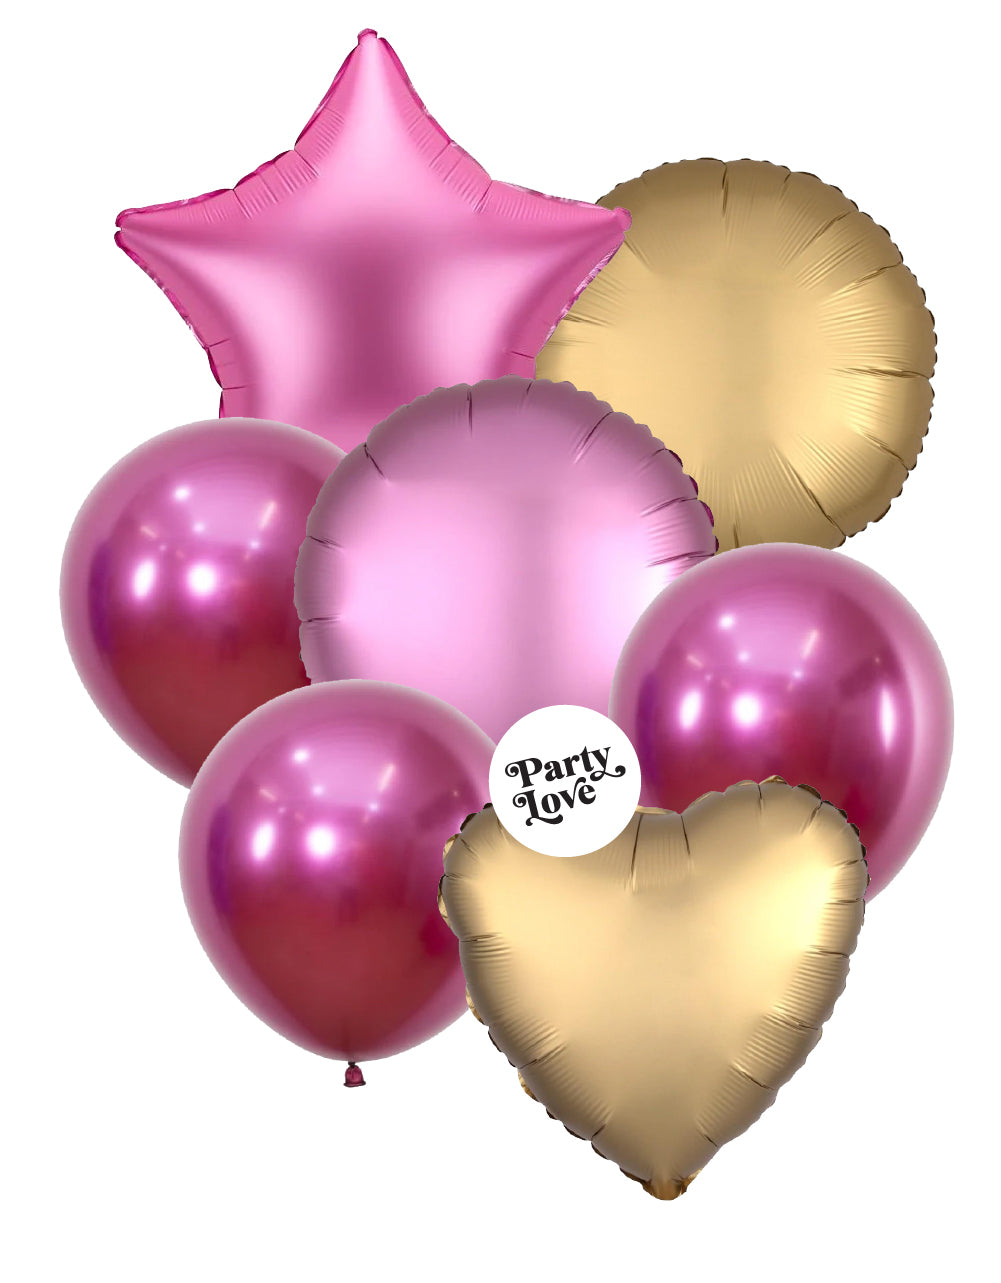 Pink and Gold Balloon Bouquet Party Love